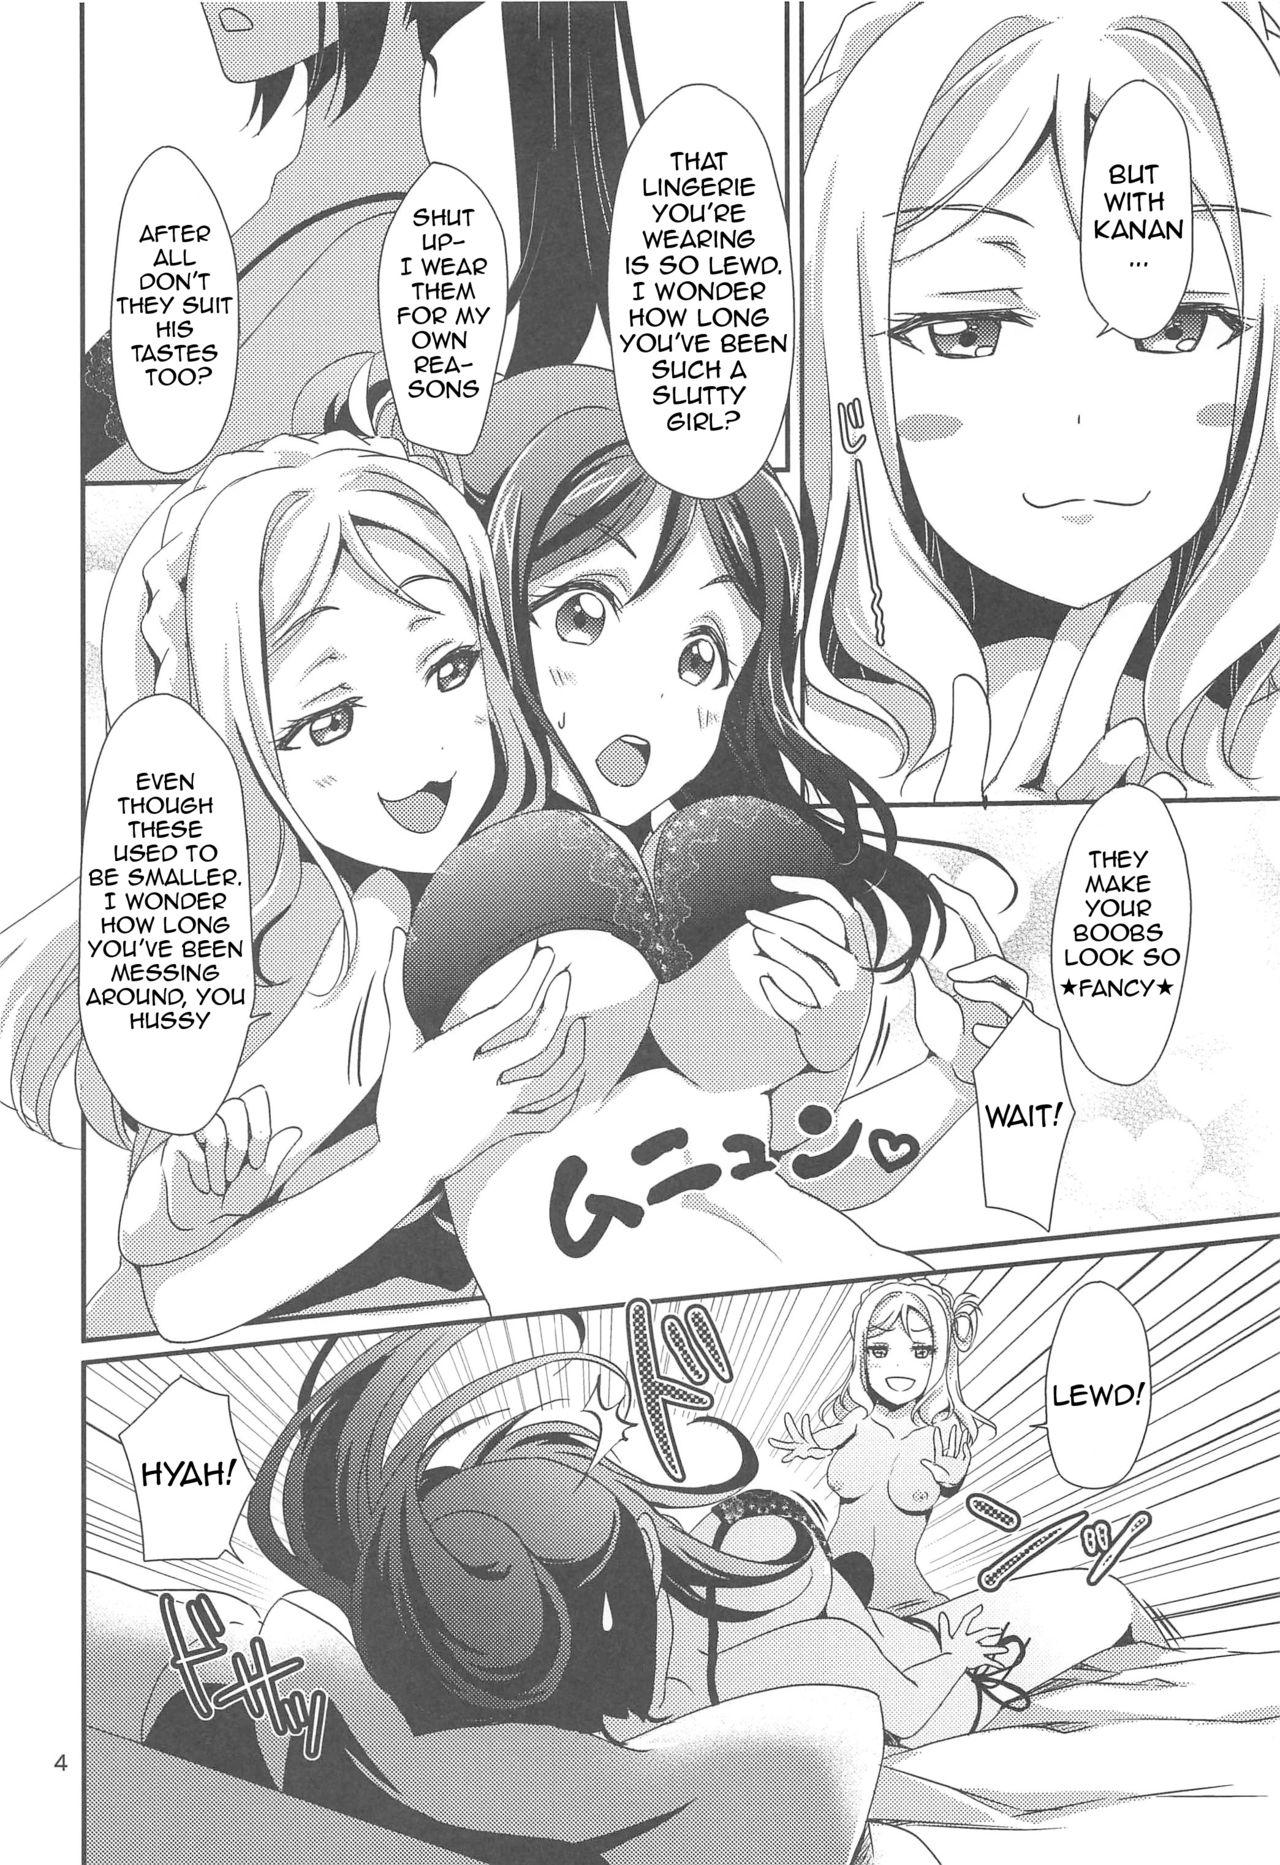 Solo 3P PARTY TRAIN - Love live sunshine Girl On Girl - Page 5